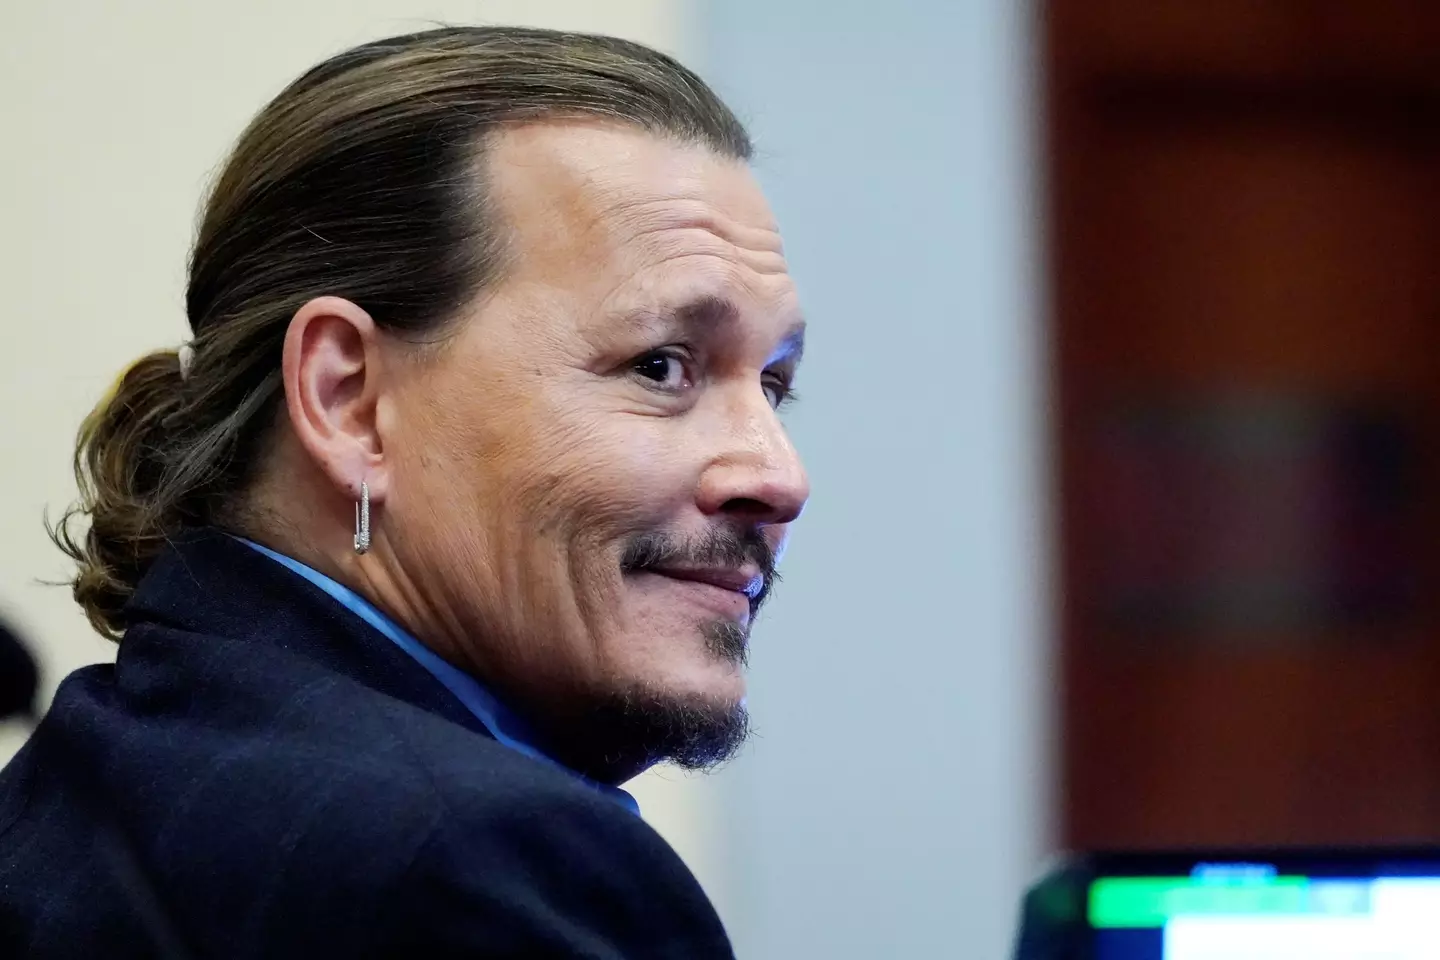 Legal experts have claimed Johnny Depp's behavior could result in him losing the case.